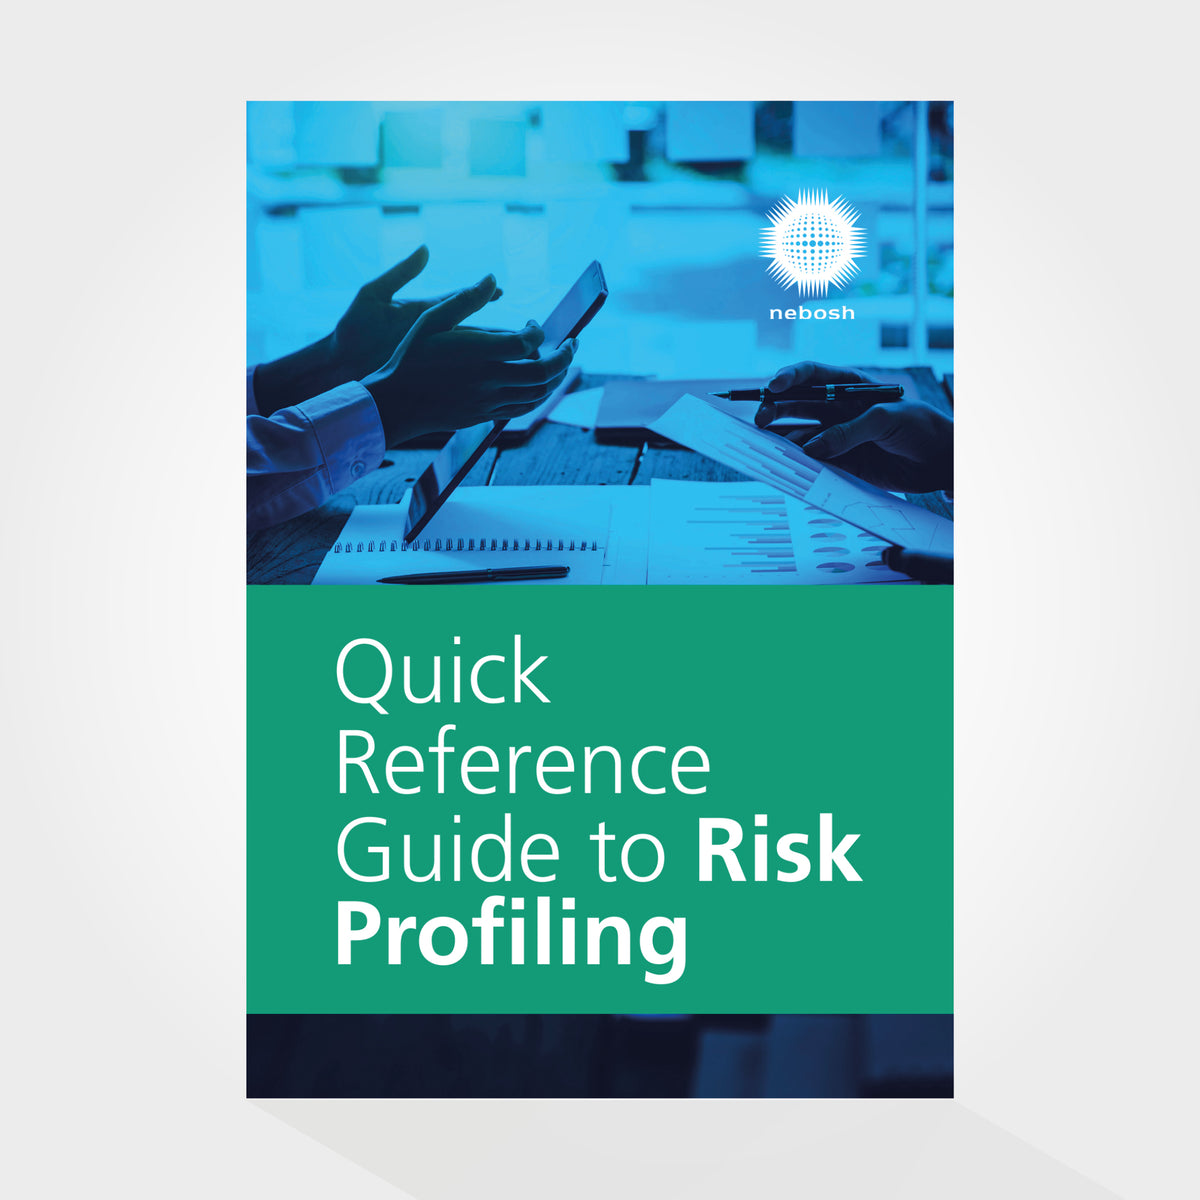 Quick Reference Guide to Risk Profiling